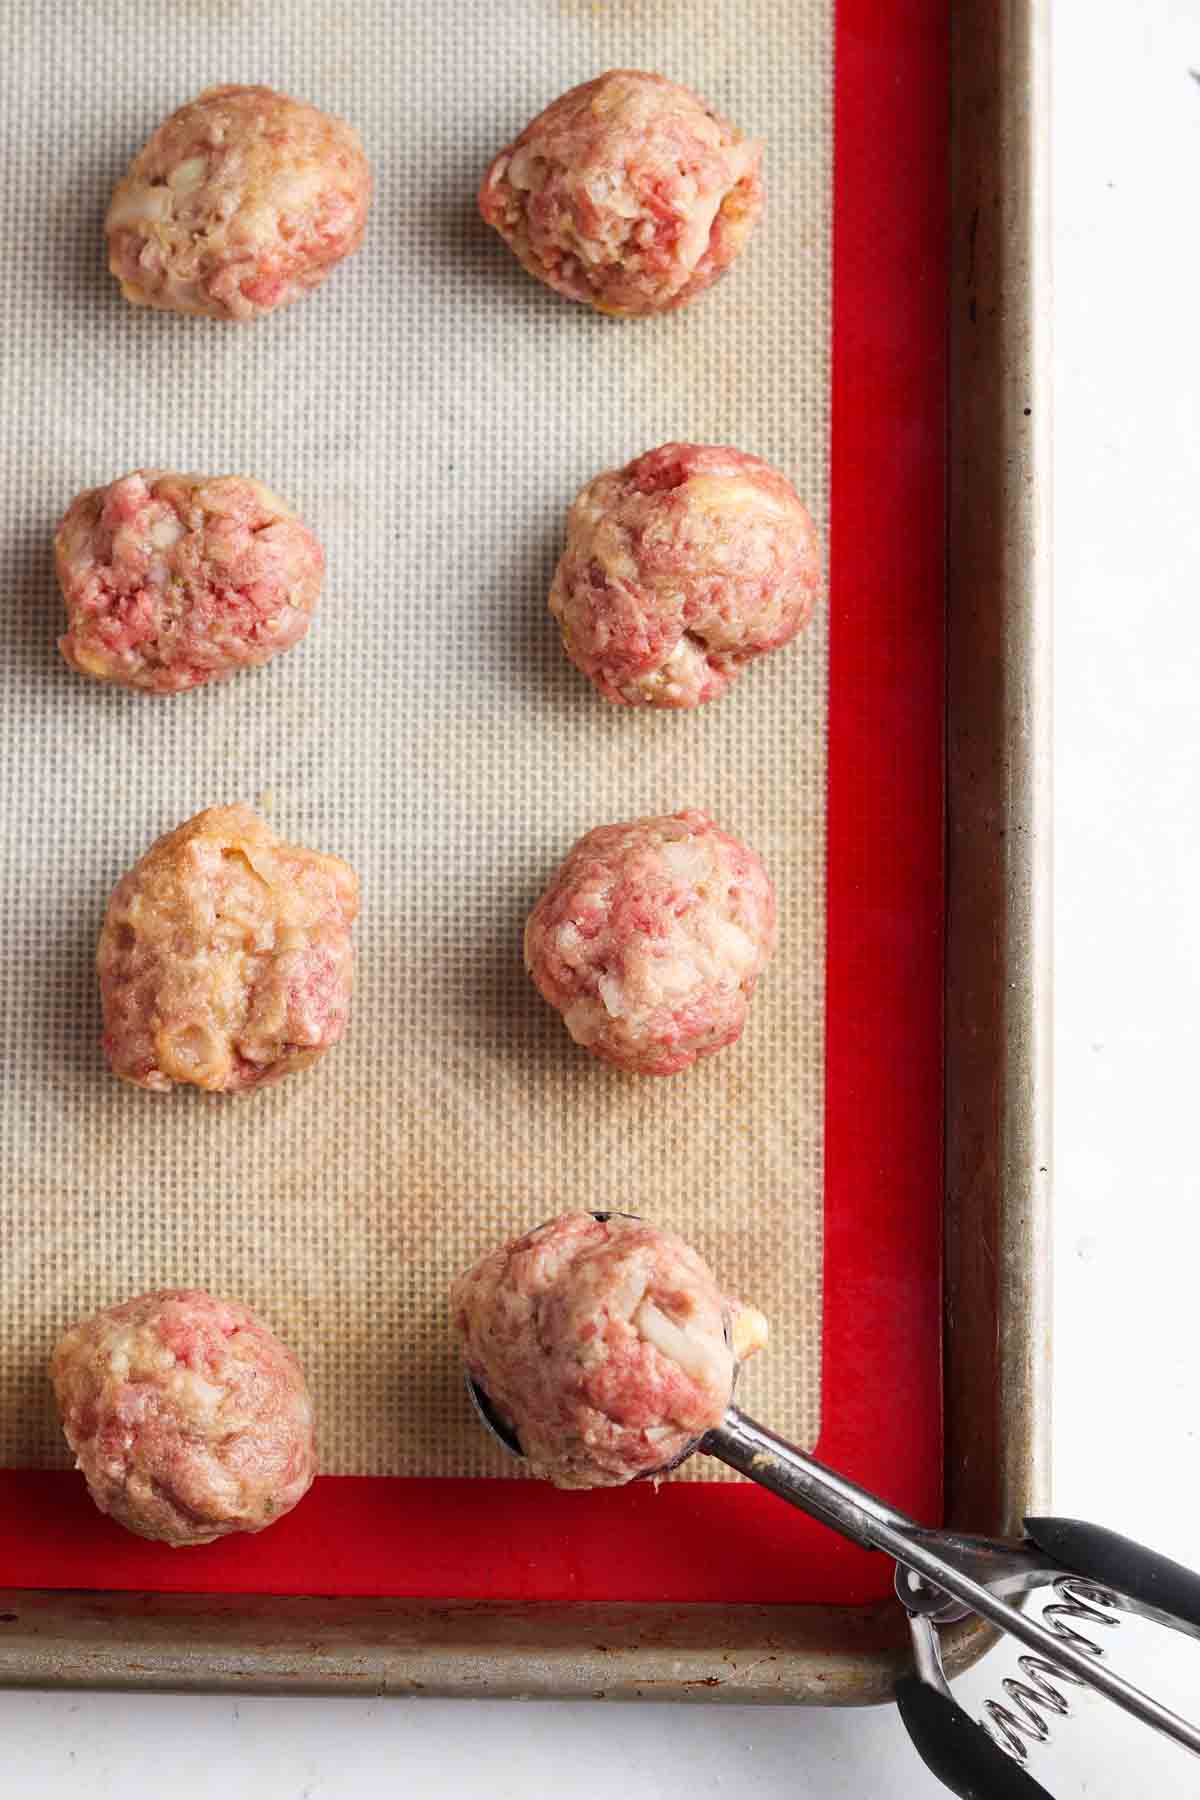 Raw ground beef meatballs on a baking tray with a cookie scooper.